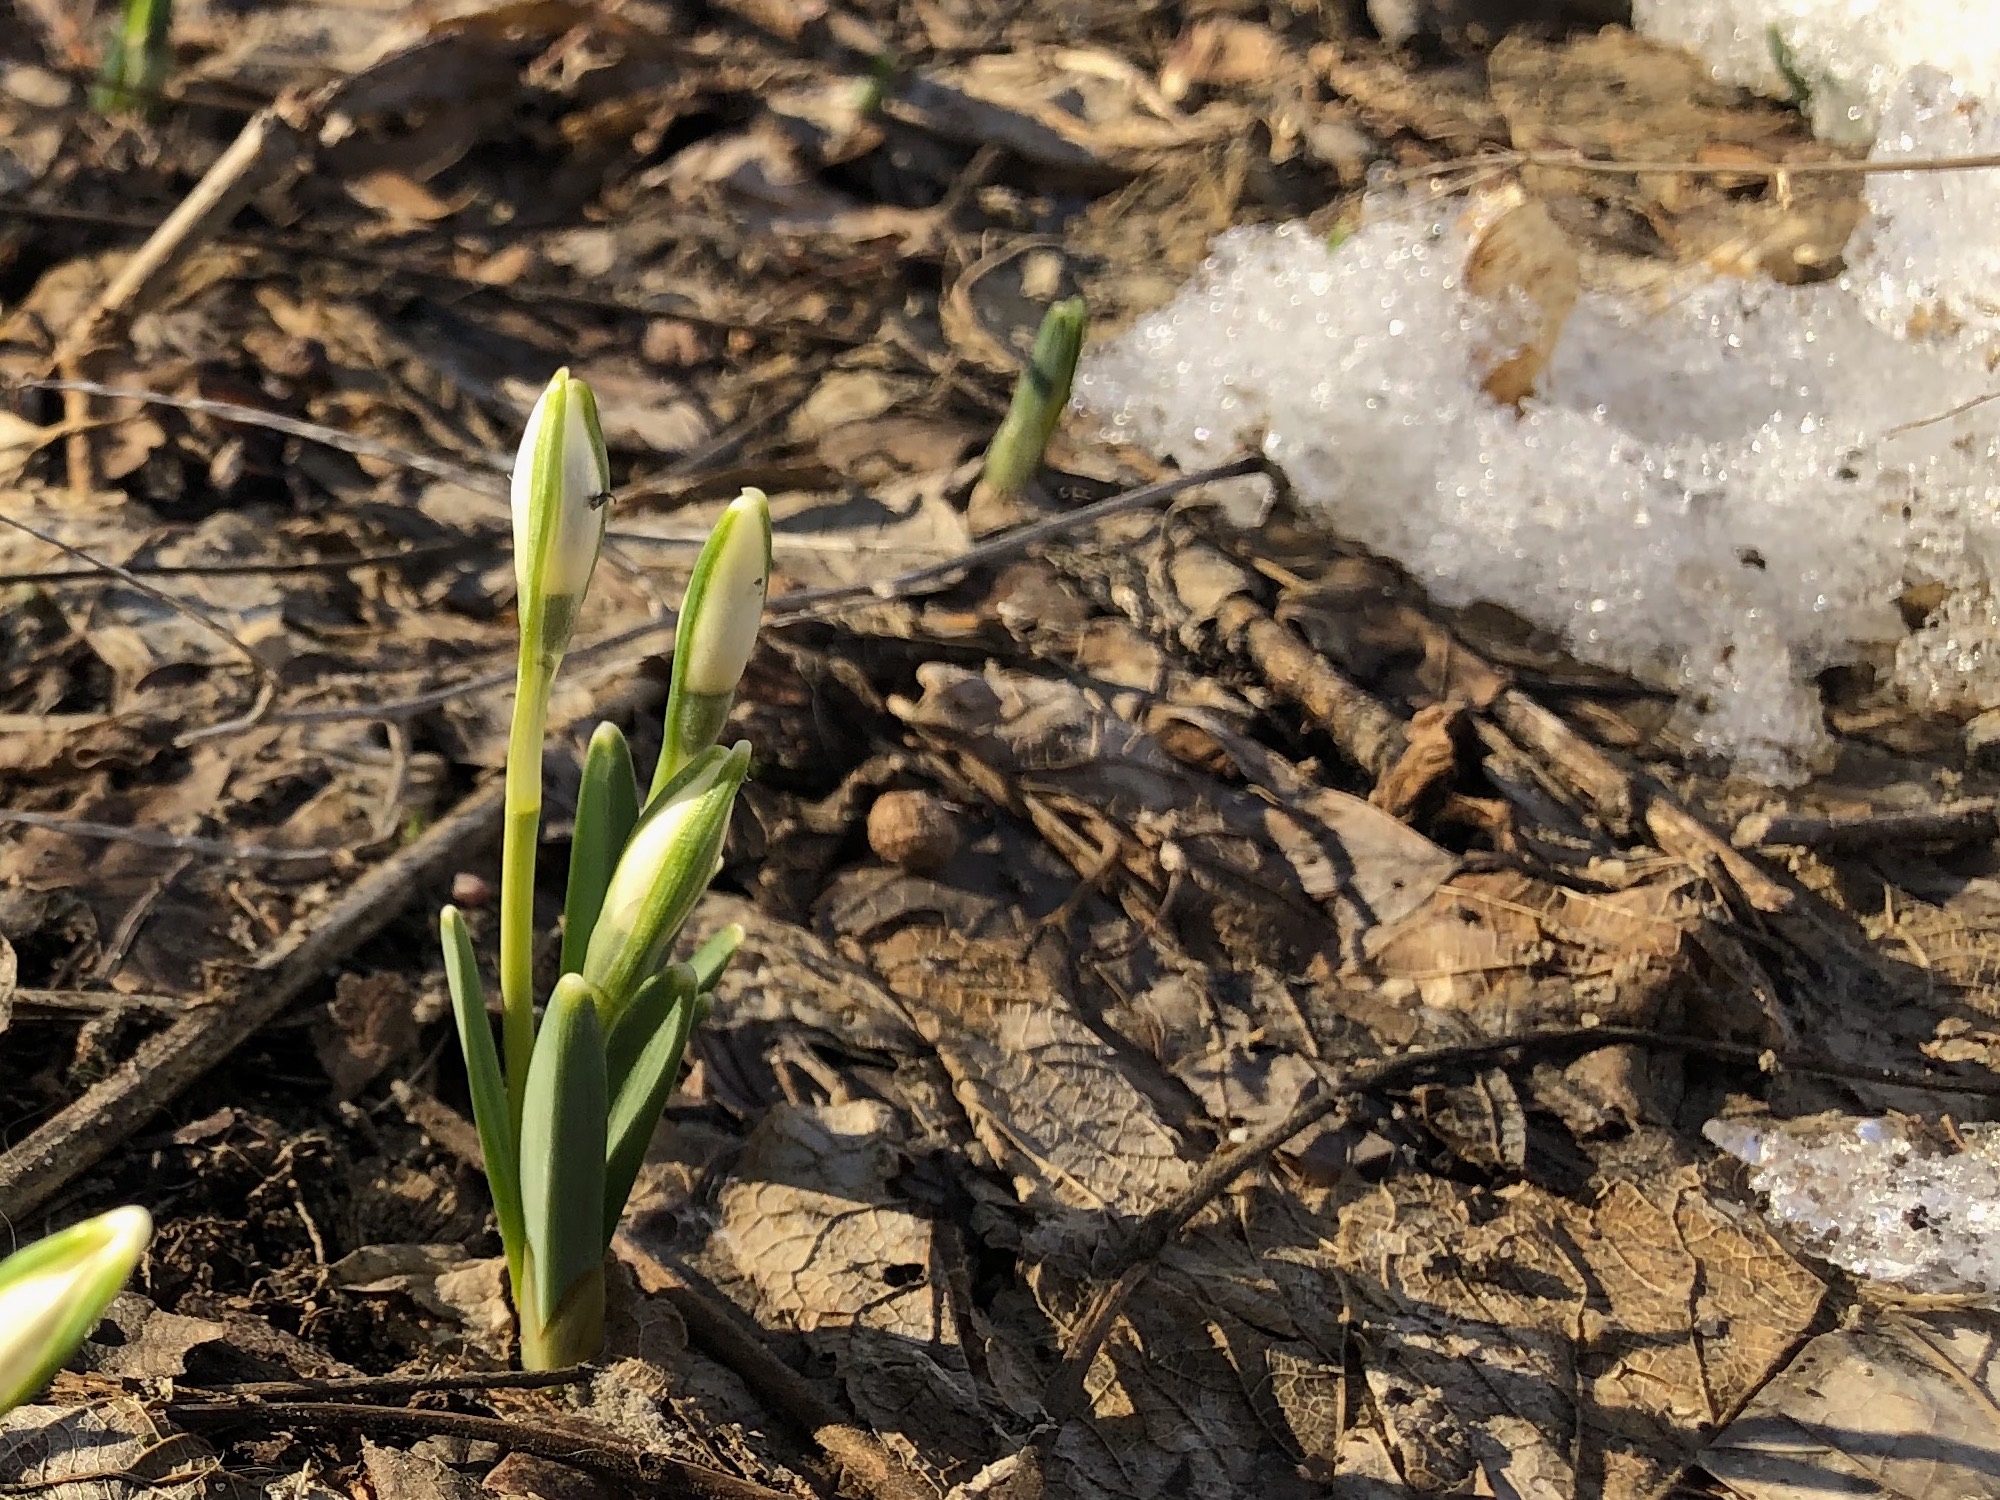 Snowdrops emerging in Madison Wisconsin along Arbor Drive on March 5, 2021..